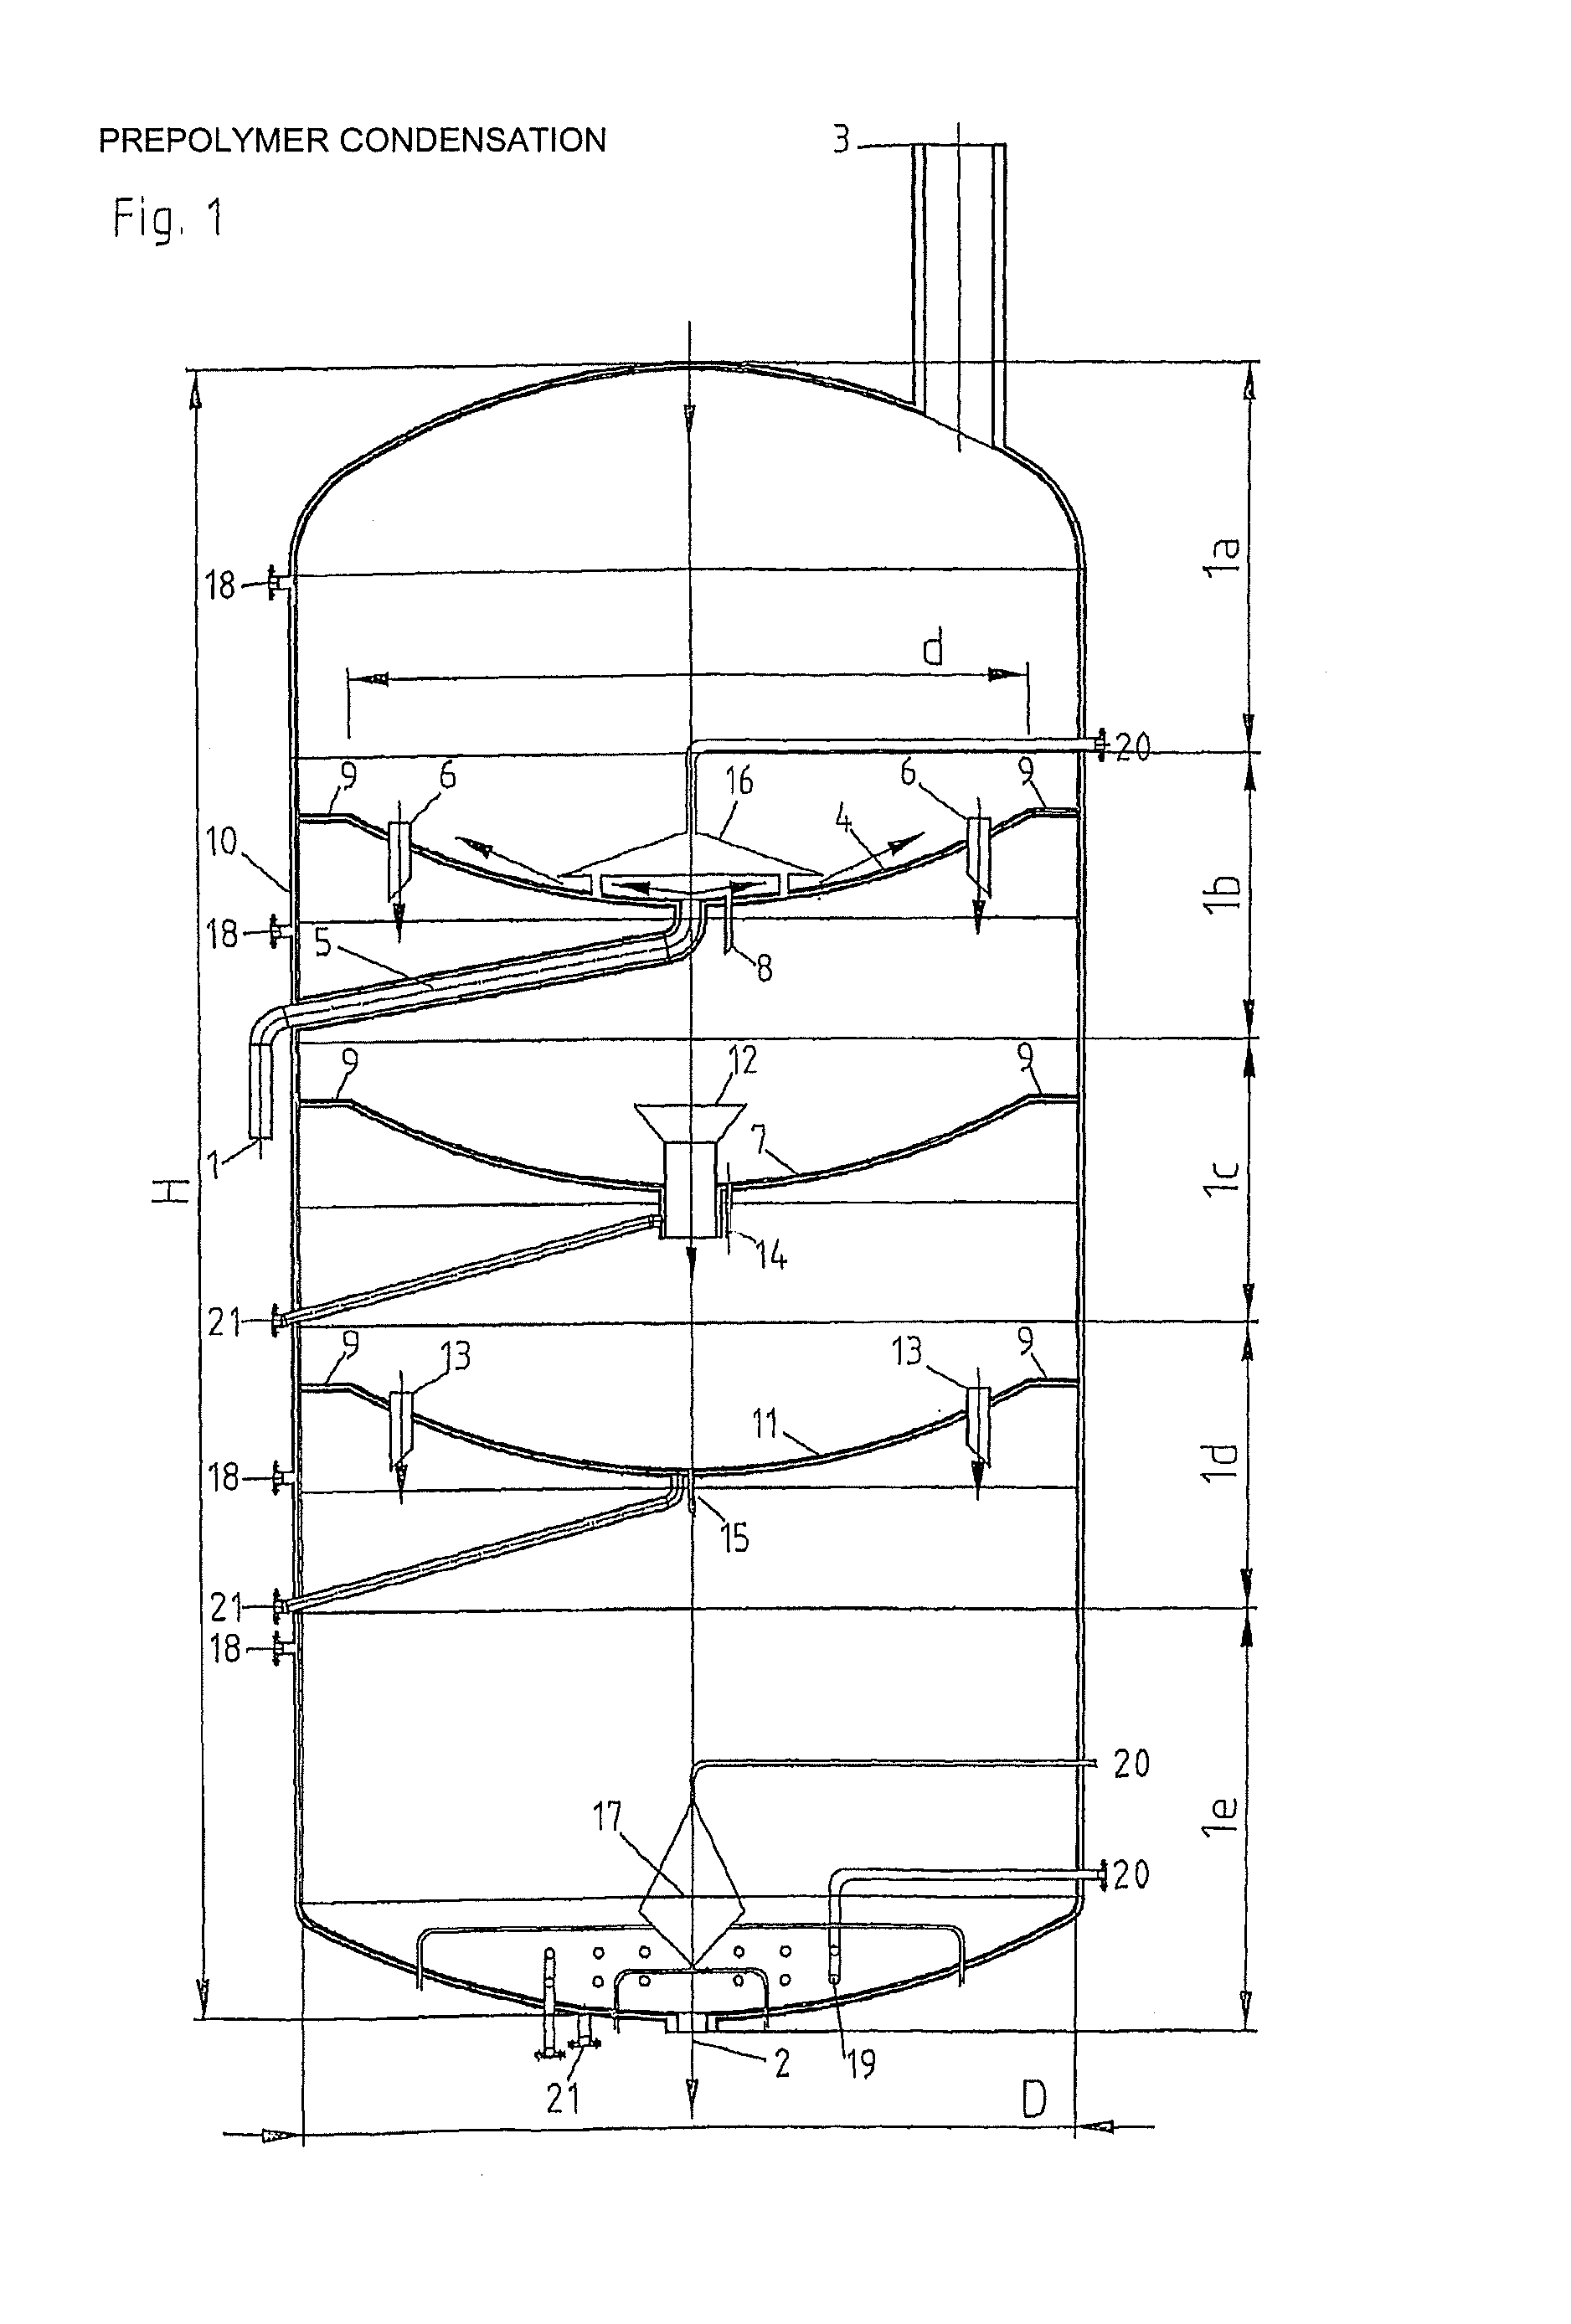 Modular device for the continuous degassing and production of polymer precondensate with high reaction product surface to volume ratio with gentle treatment of the reaction product mass